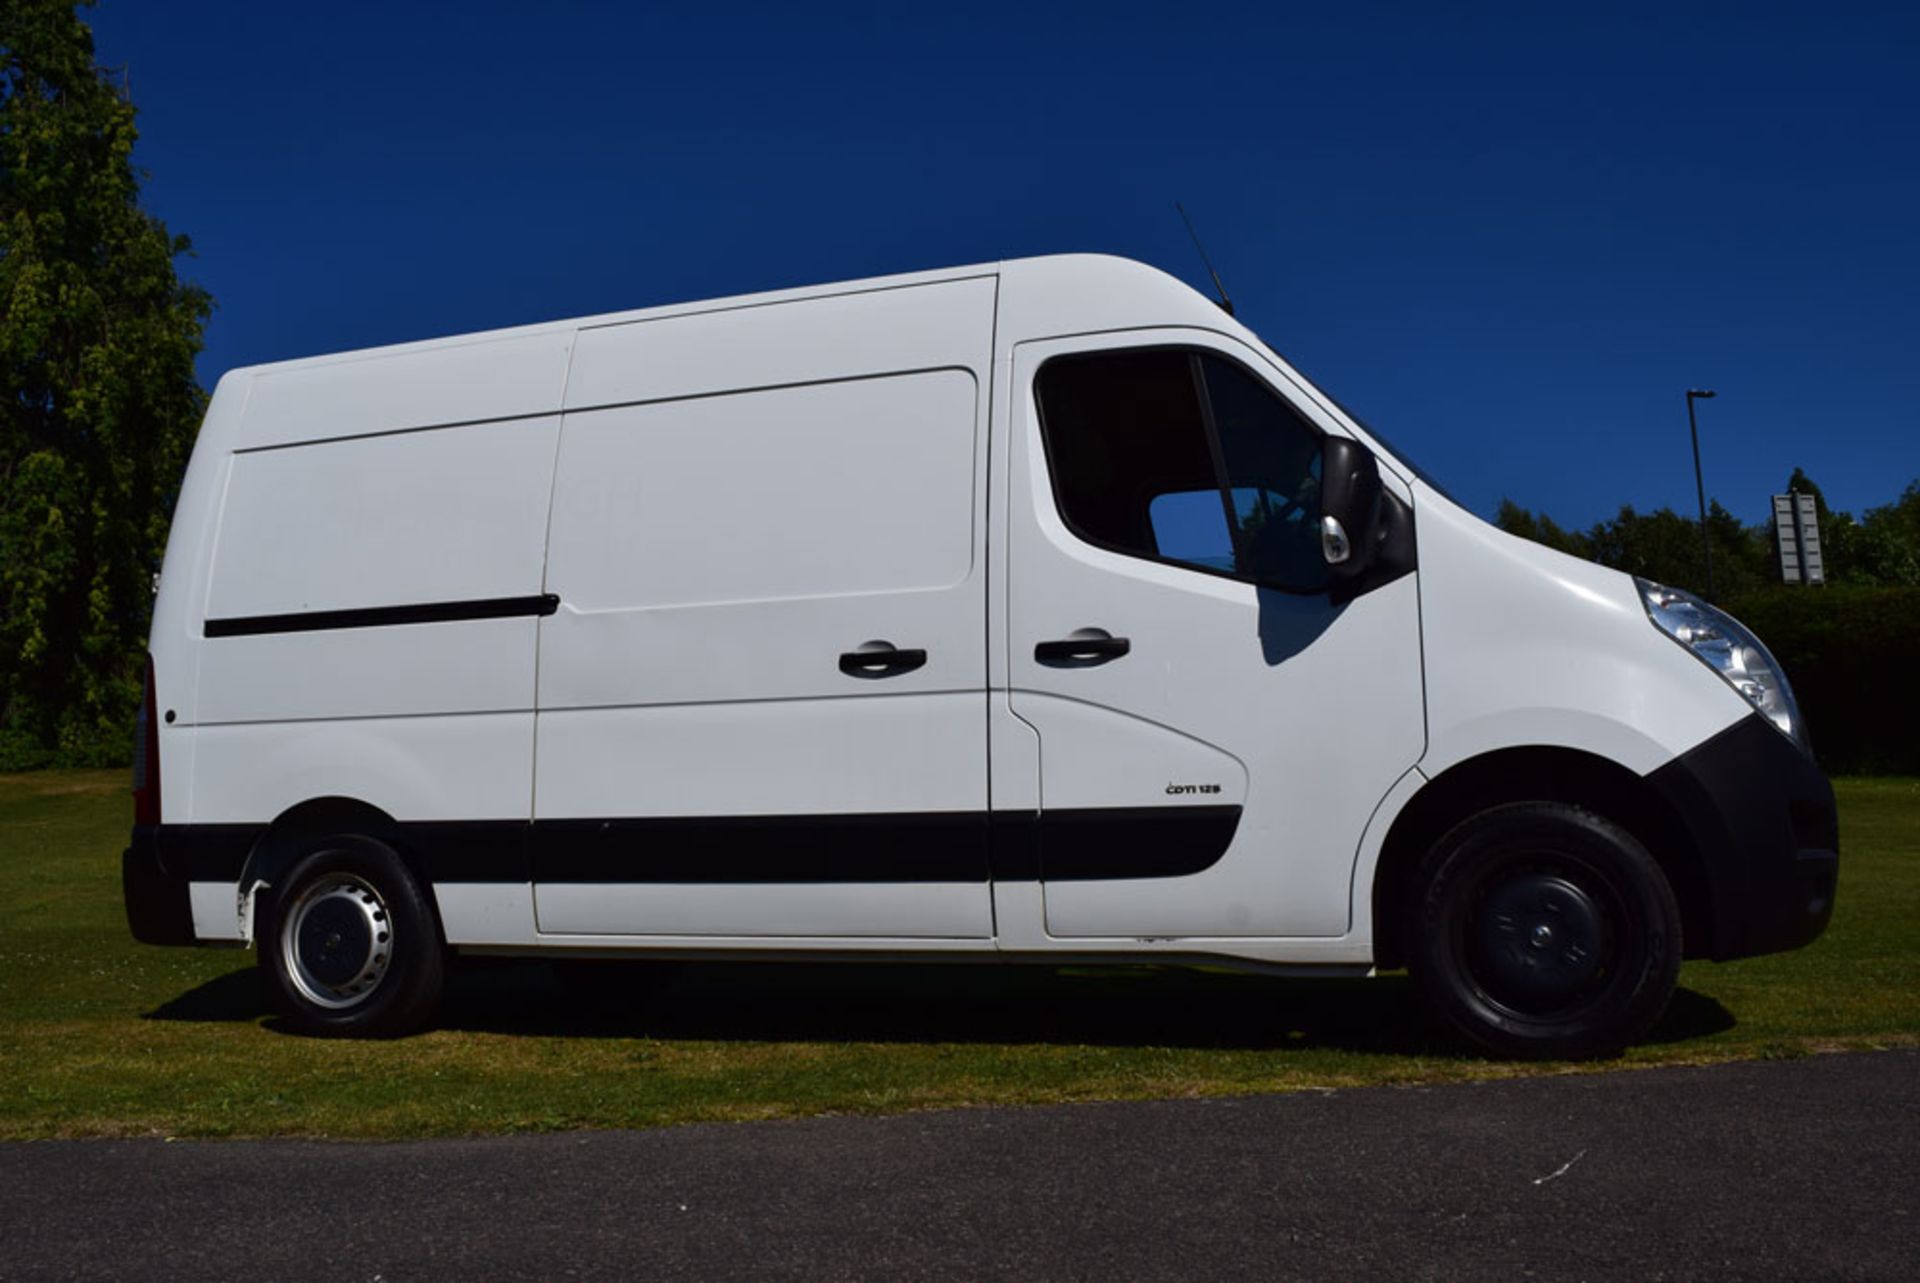 2013 Vauxhall Movano F3500 CDTI L2H2 Panel Van With Ramp, Winch And Washable Lining - Image 2 of 14